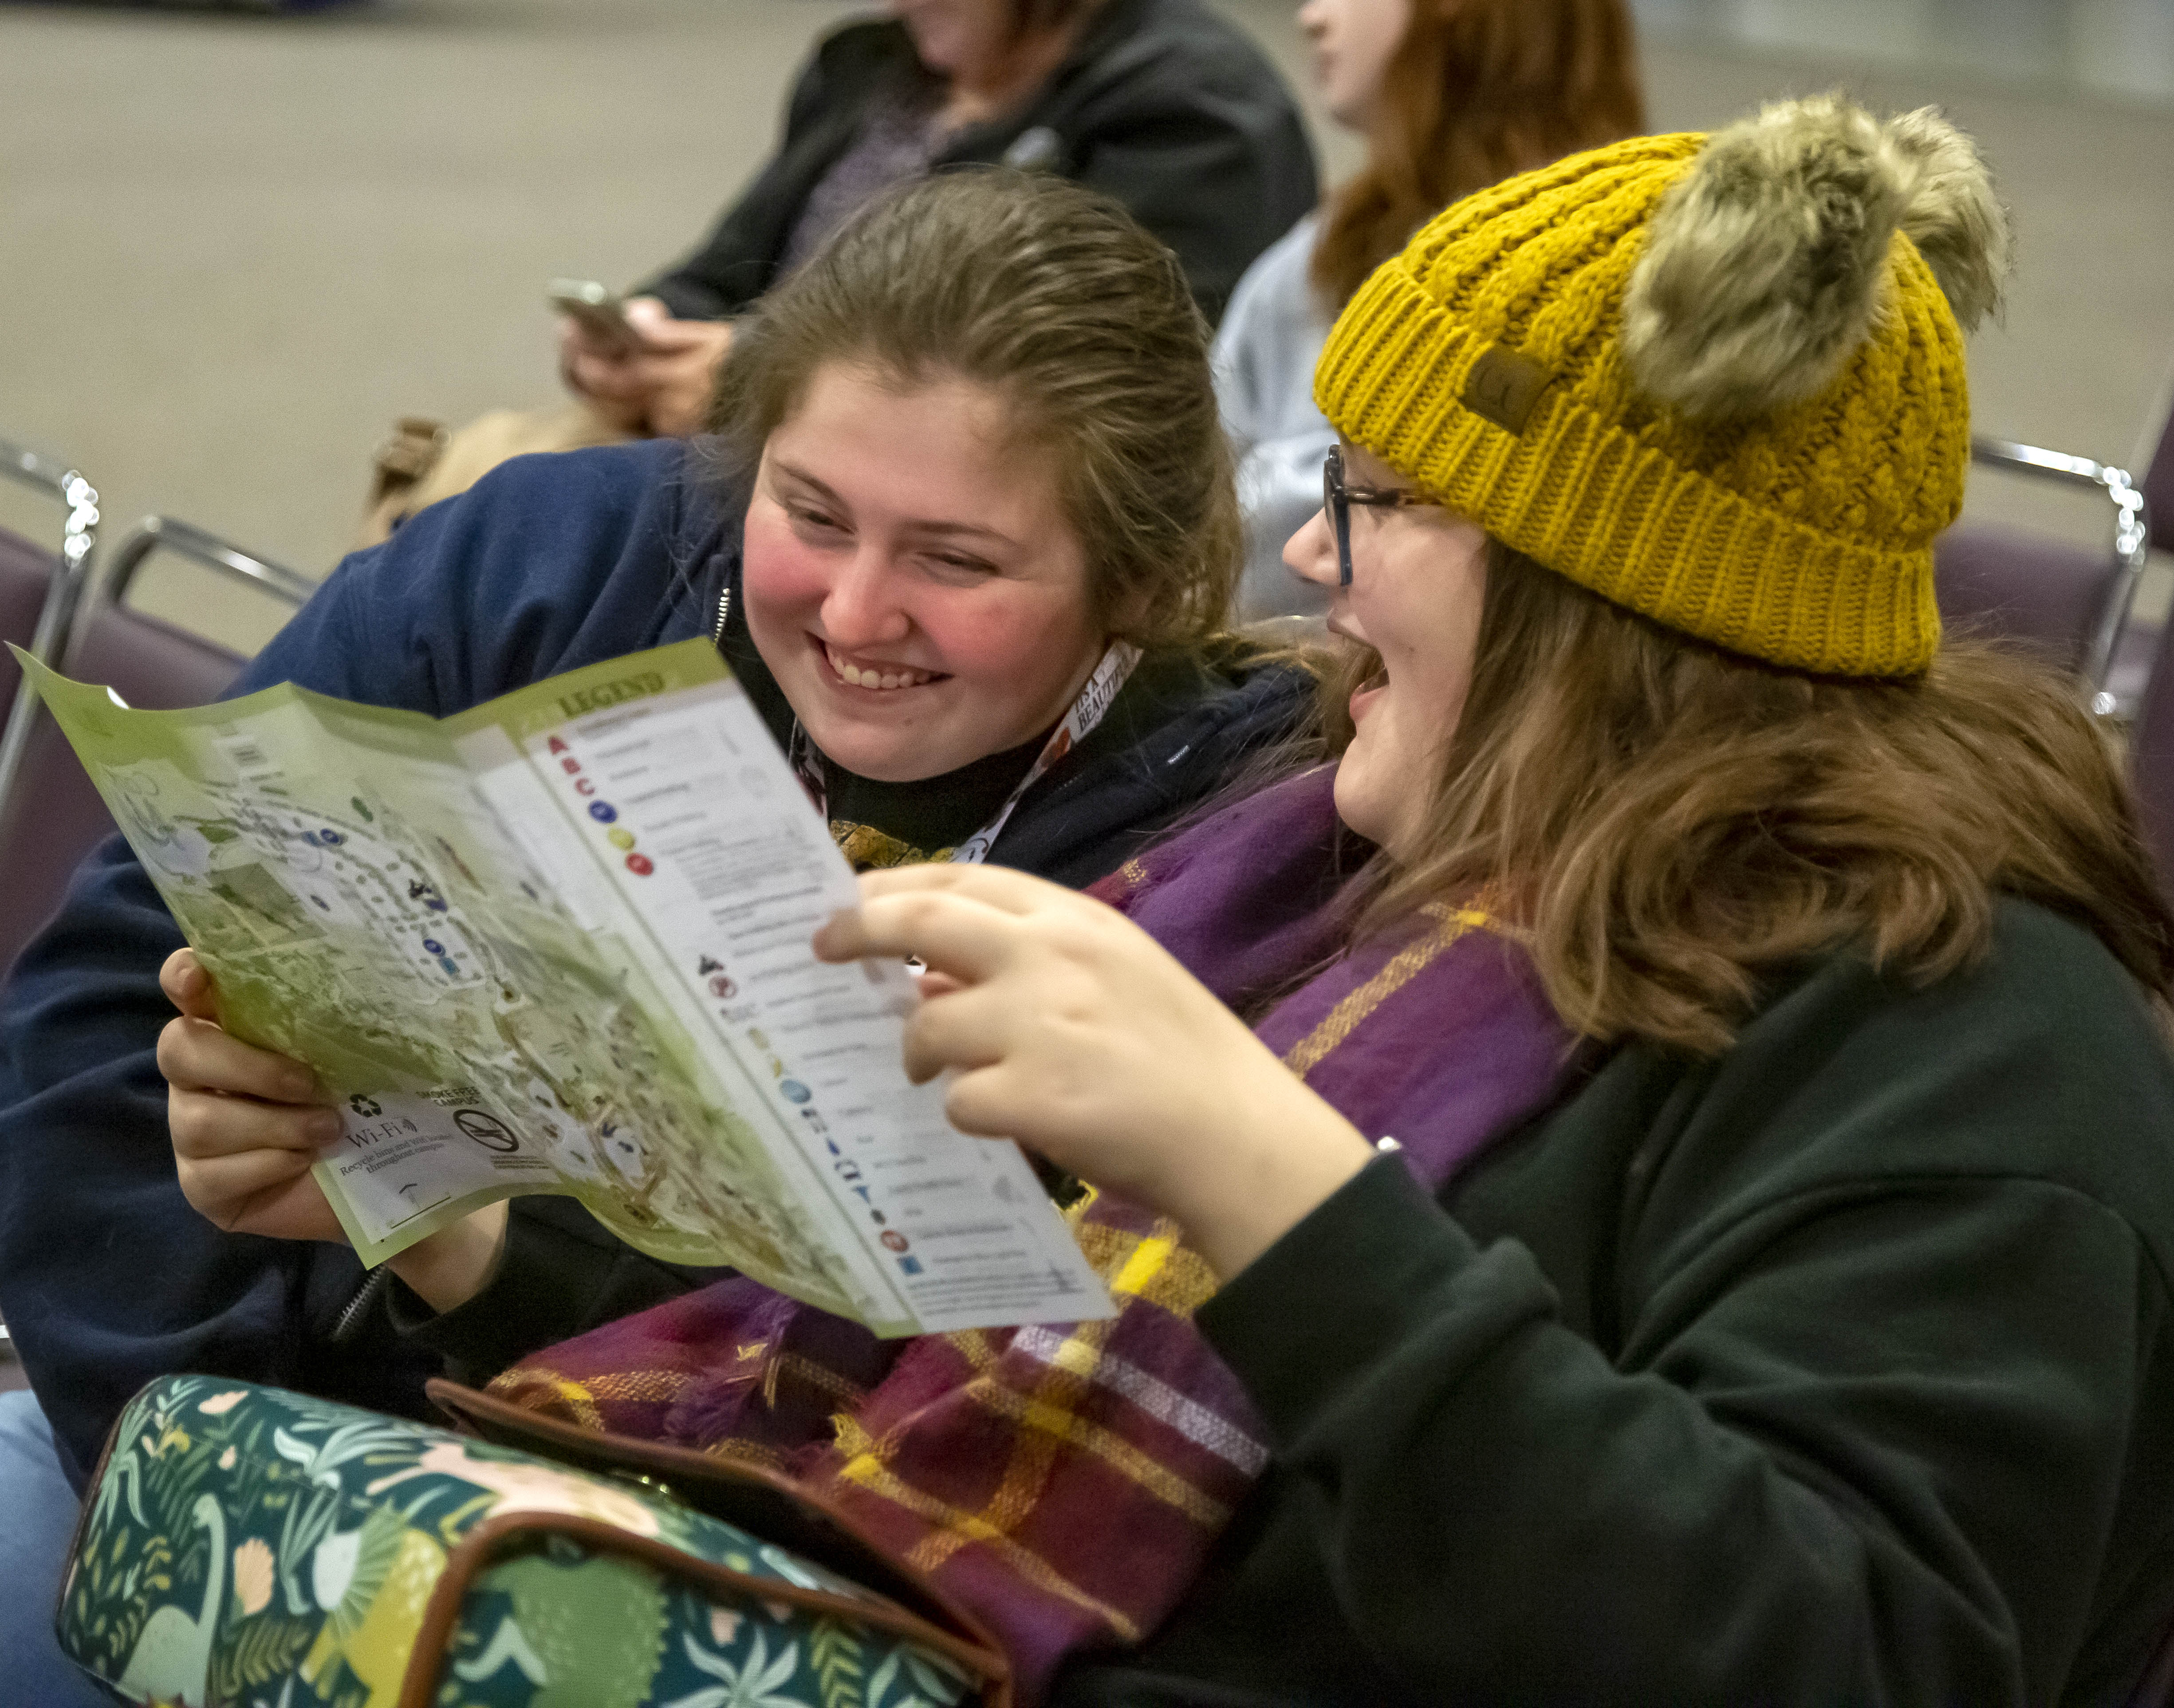 Students new to Lewis and Clark Community College for the Spring 2023 semester were welcomed to campus Thursday for a student orientation